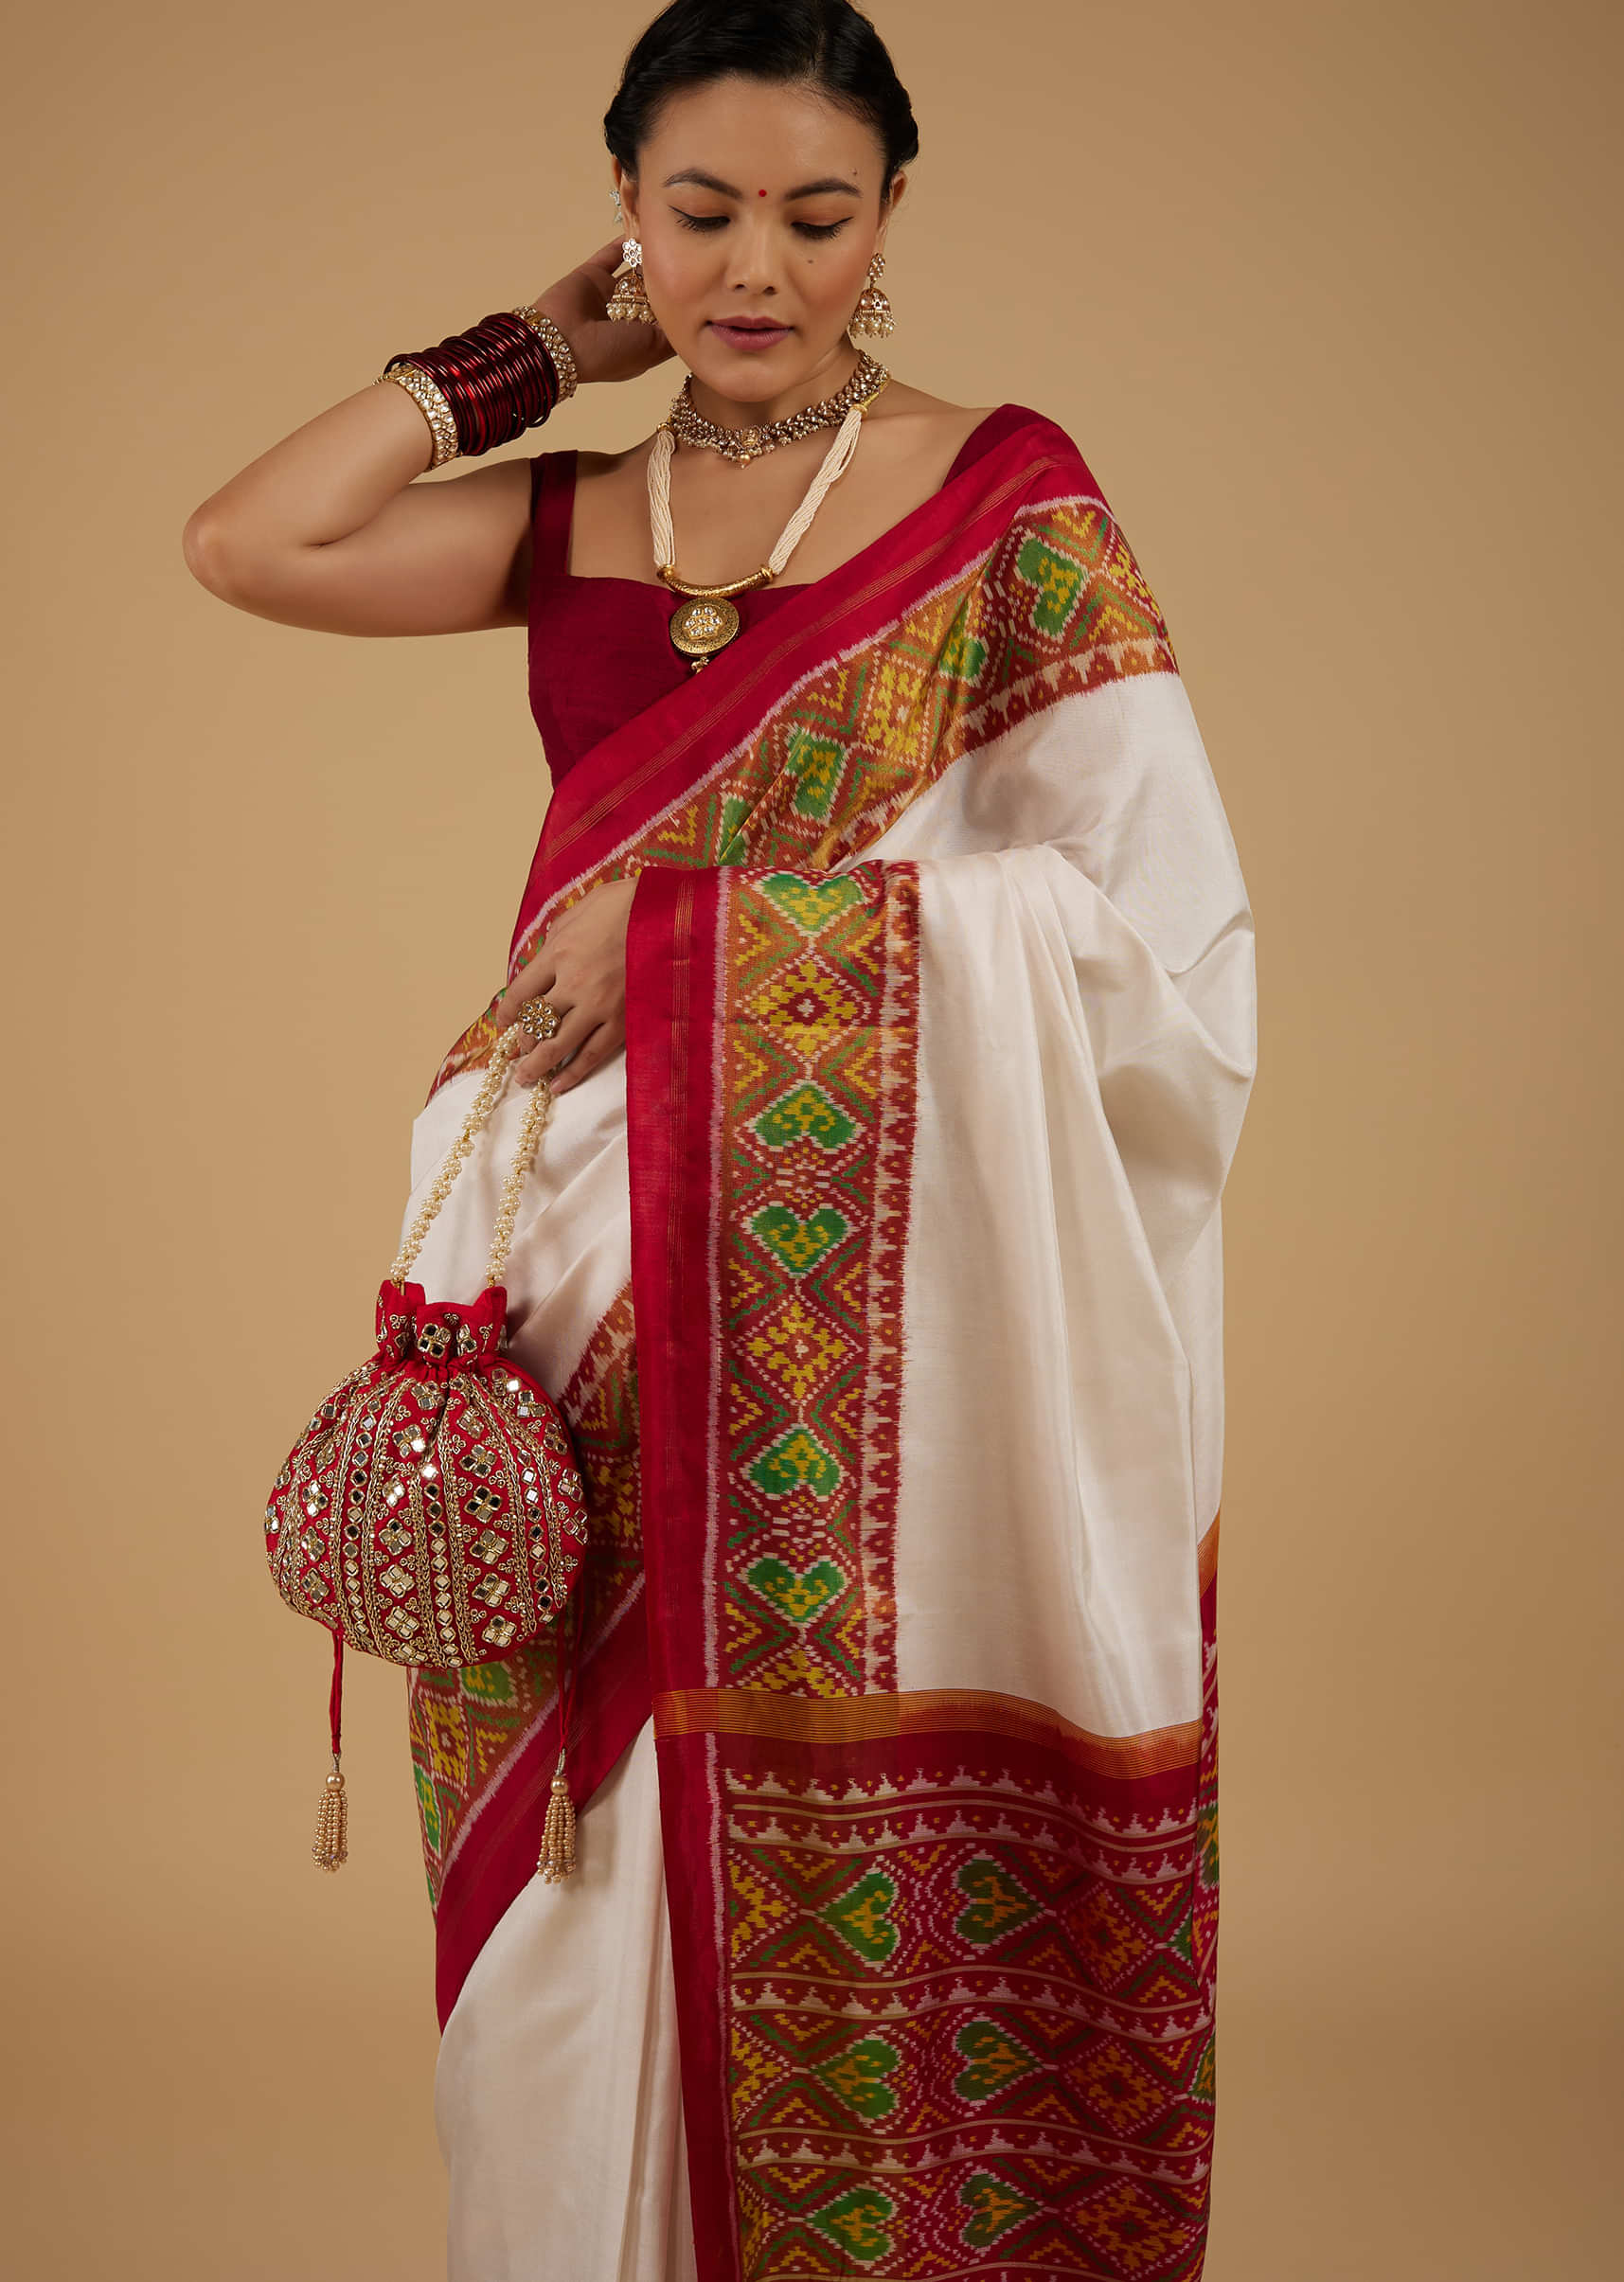 Pearl White Saree In Silk With Ikat Weave Patola Work